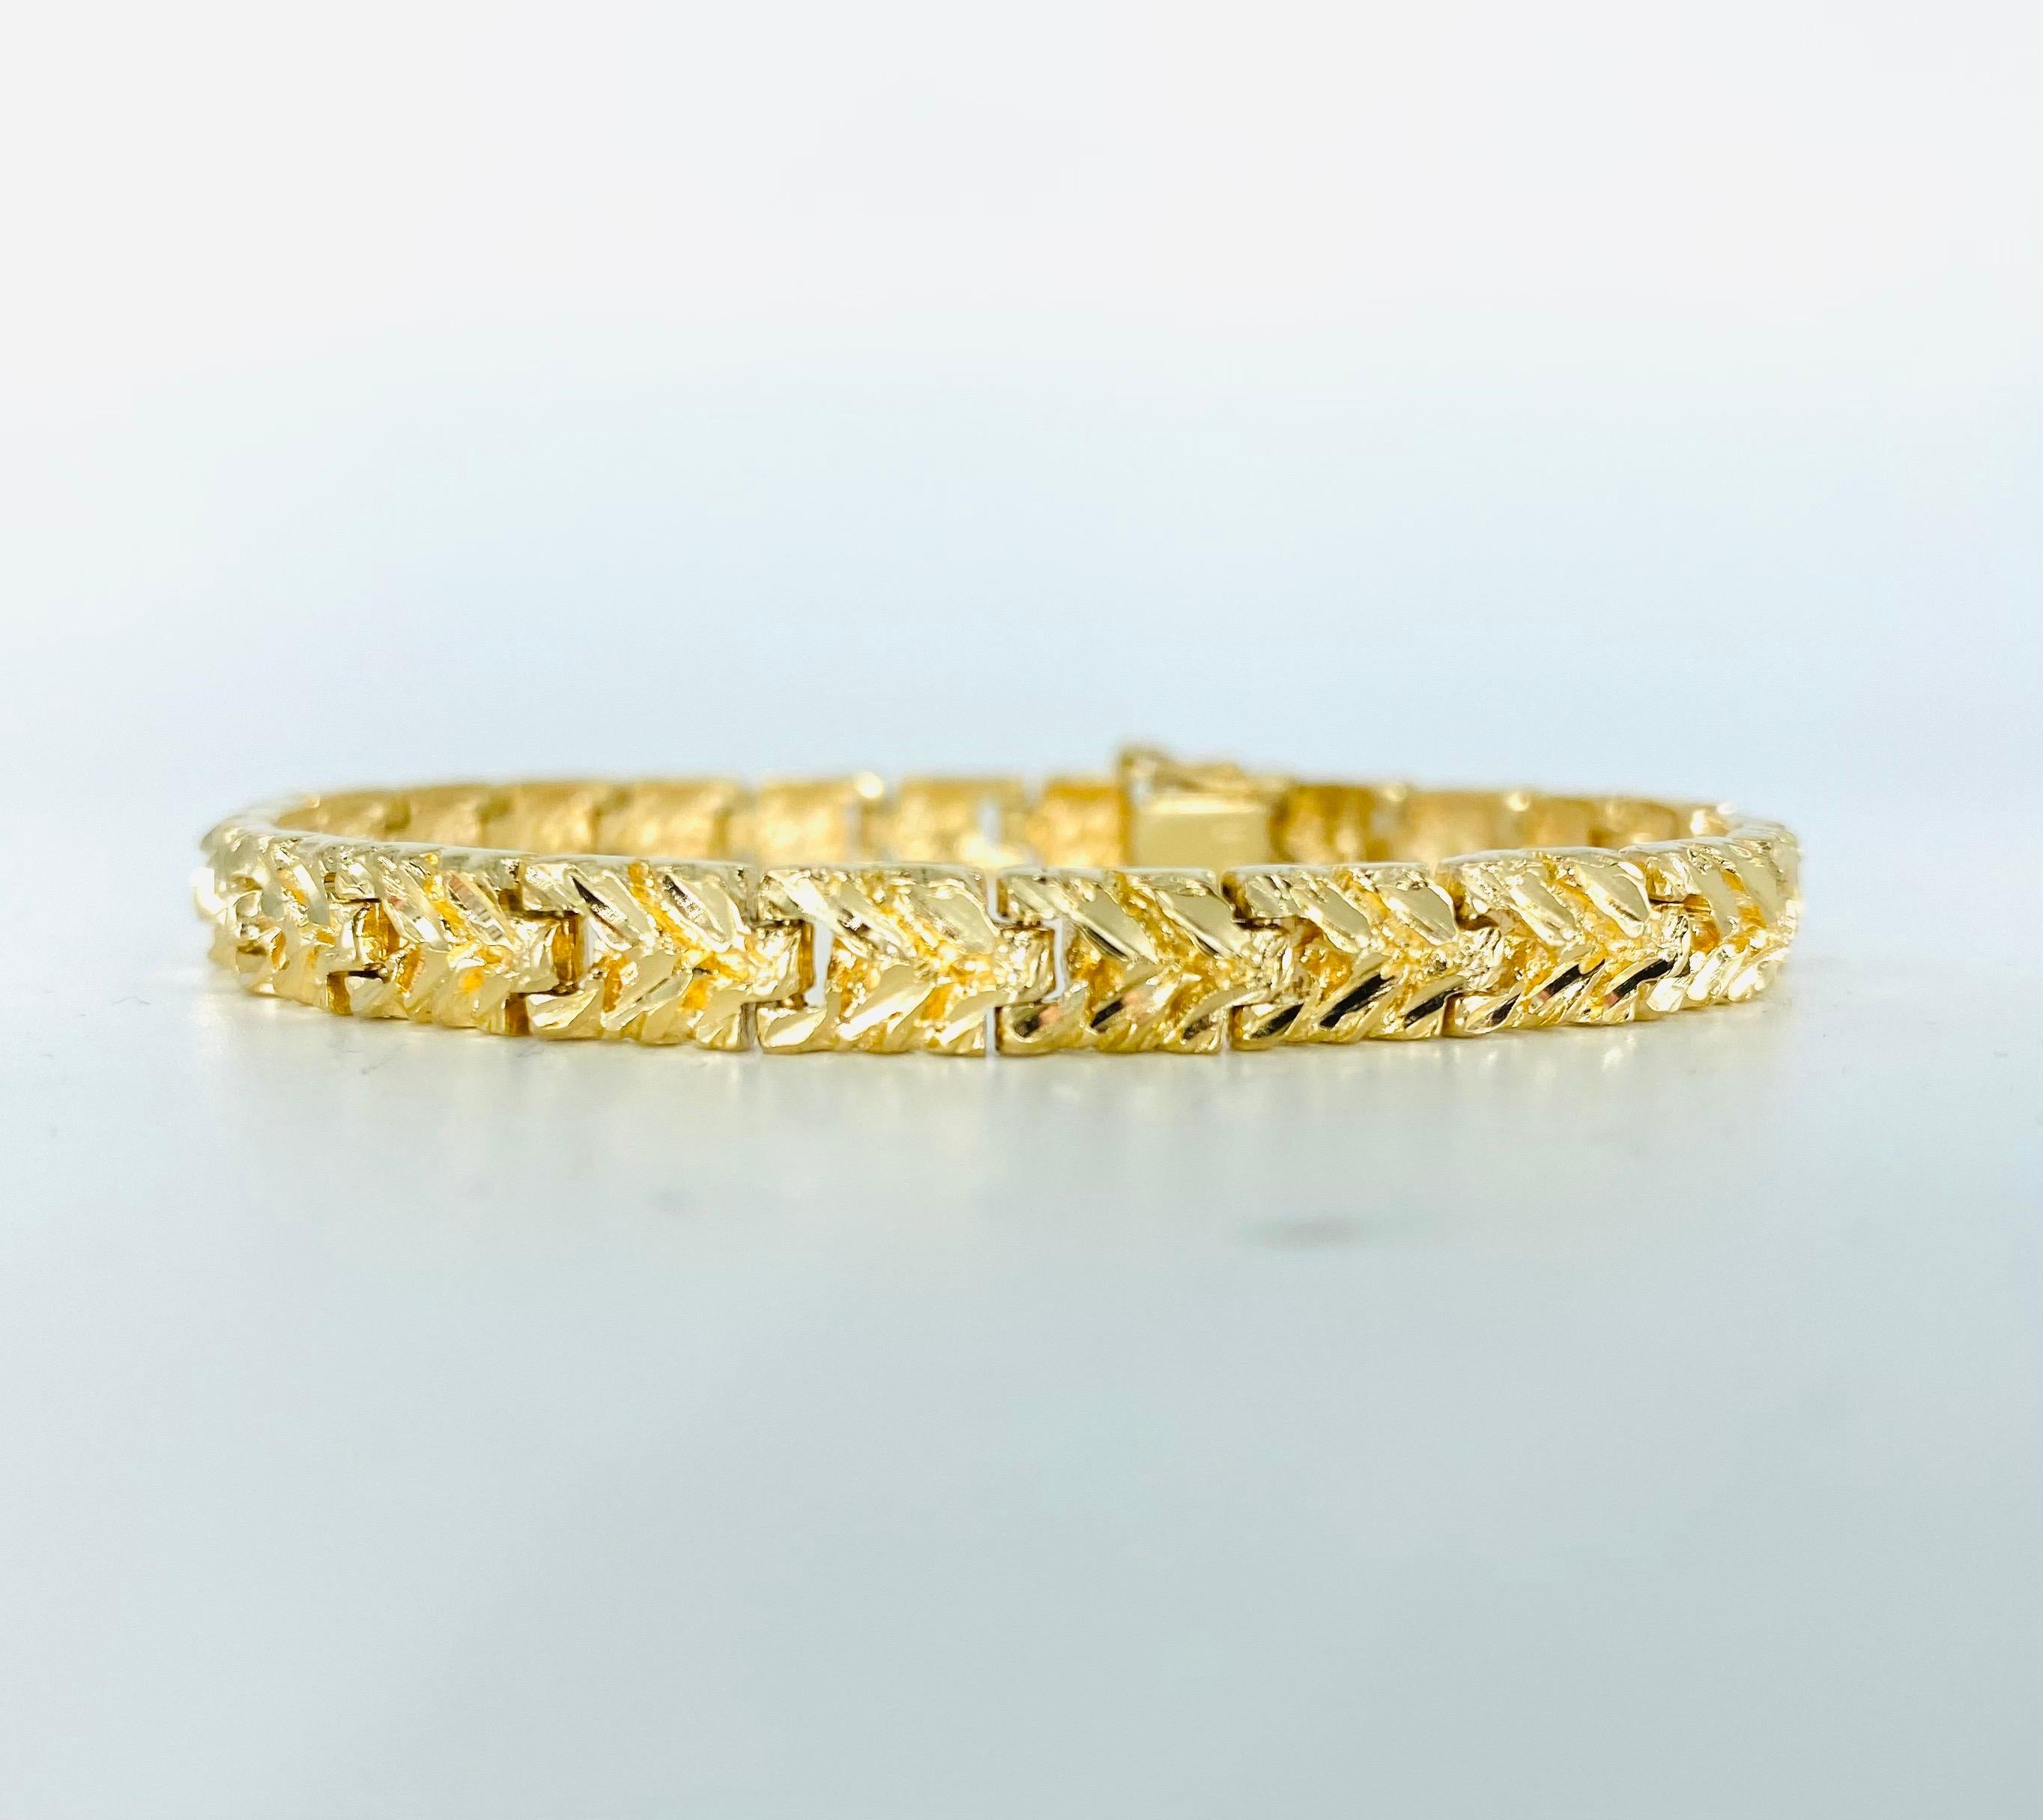 Vintage 6mm Nugget Style Diamond Cut Leaf Design Link Bracelet 14k Gold. Very unique design bracelet weighing approx 19.8 grams solid 14k gold. The bracelet is 6mm wide and measures 7 inches in length.